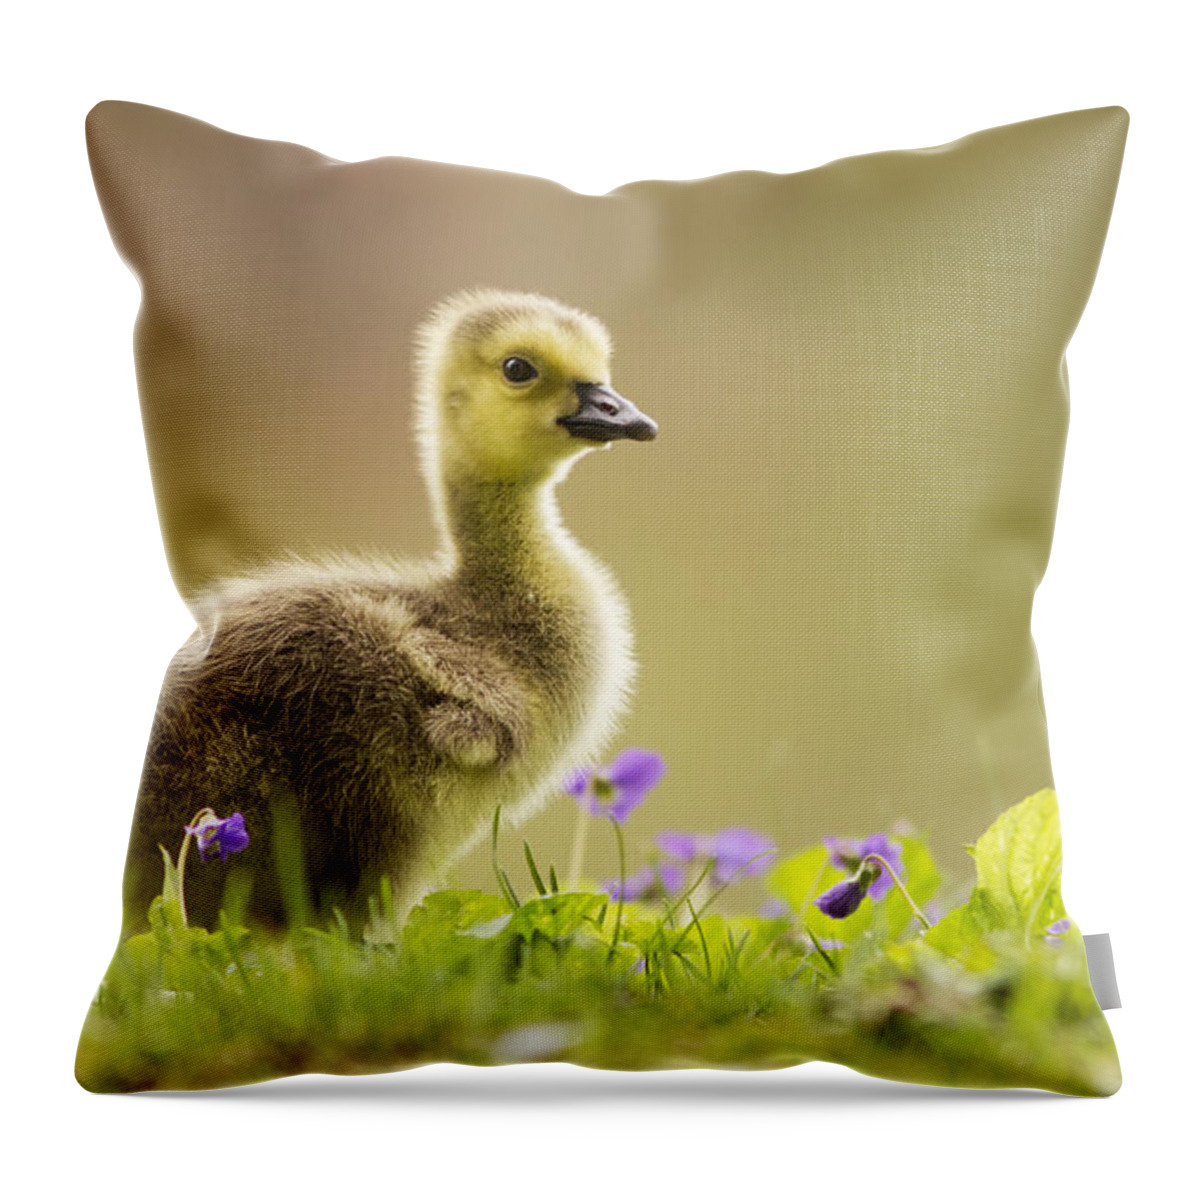 Canada Throw Pillow featuring the photograph Canada Goose Baby by Mircea Costina Photography